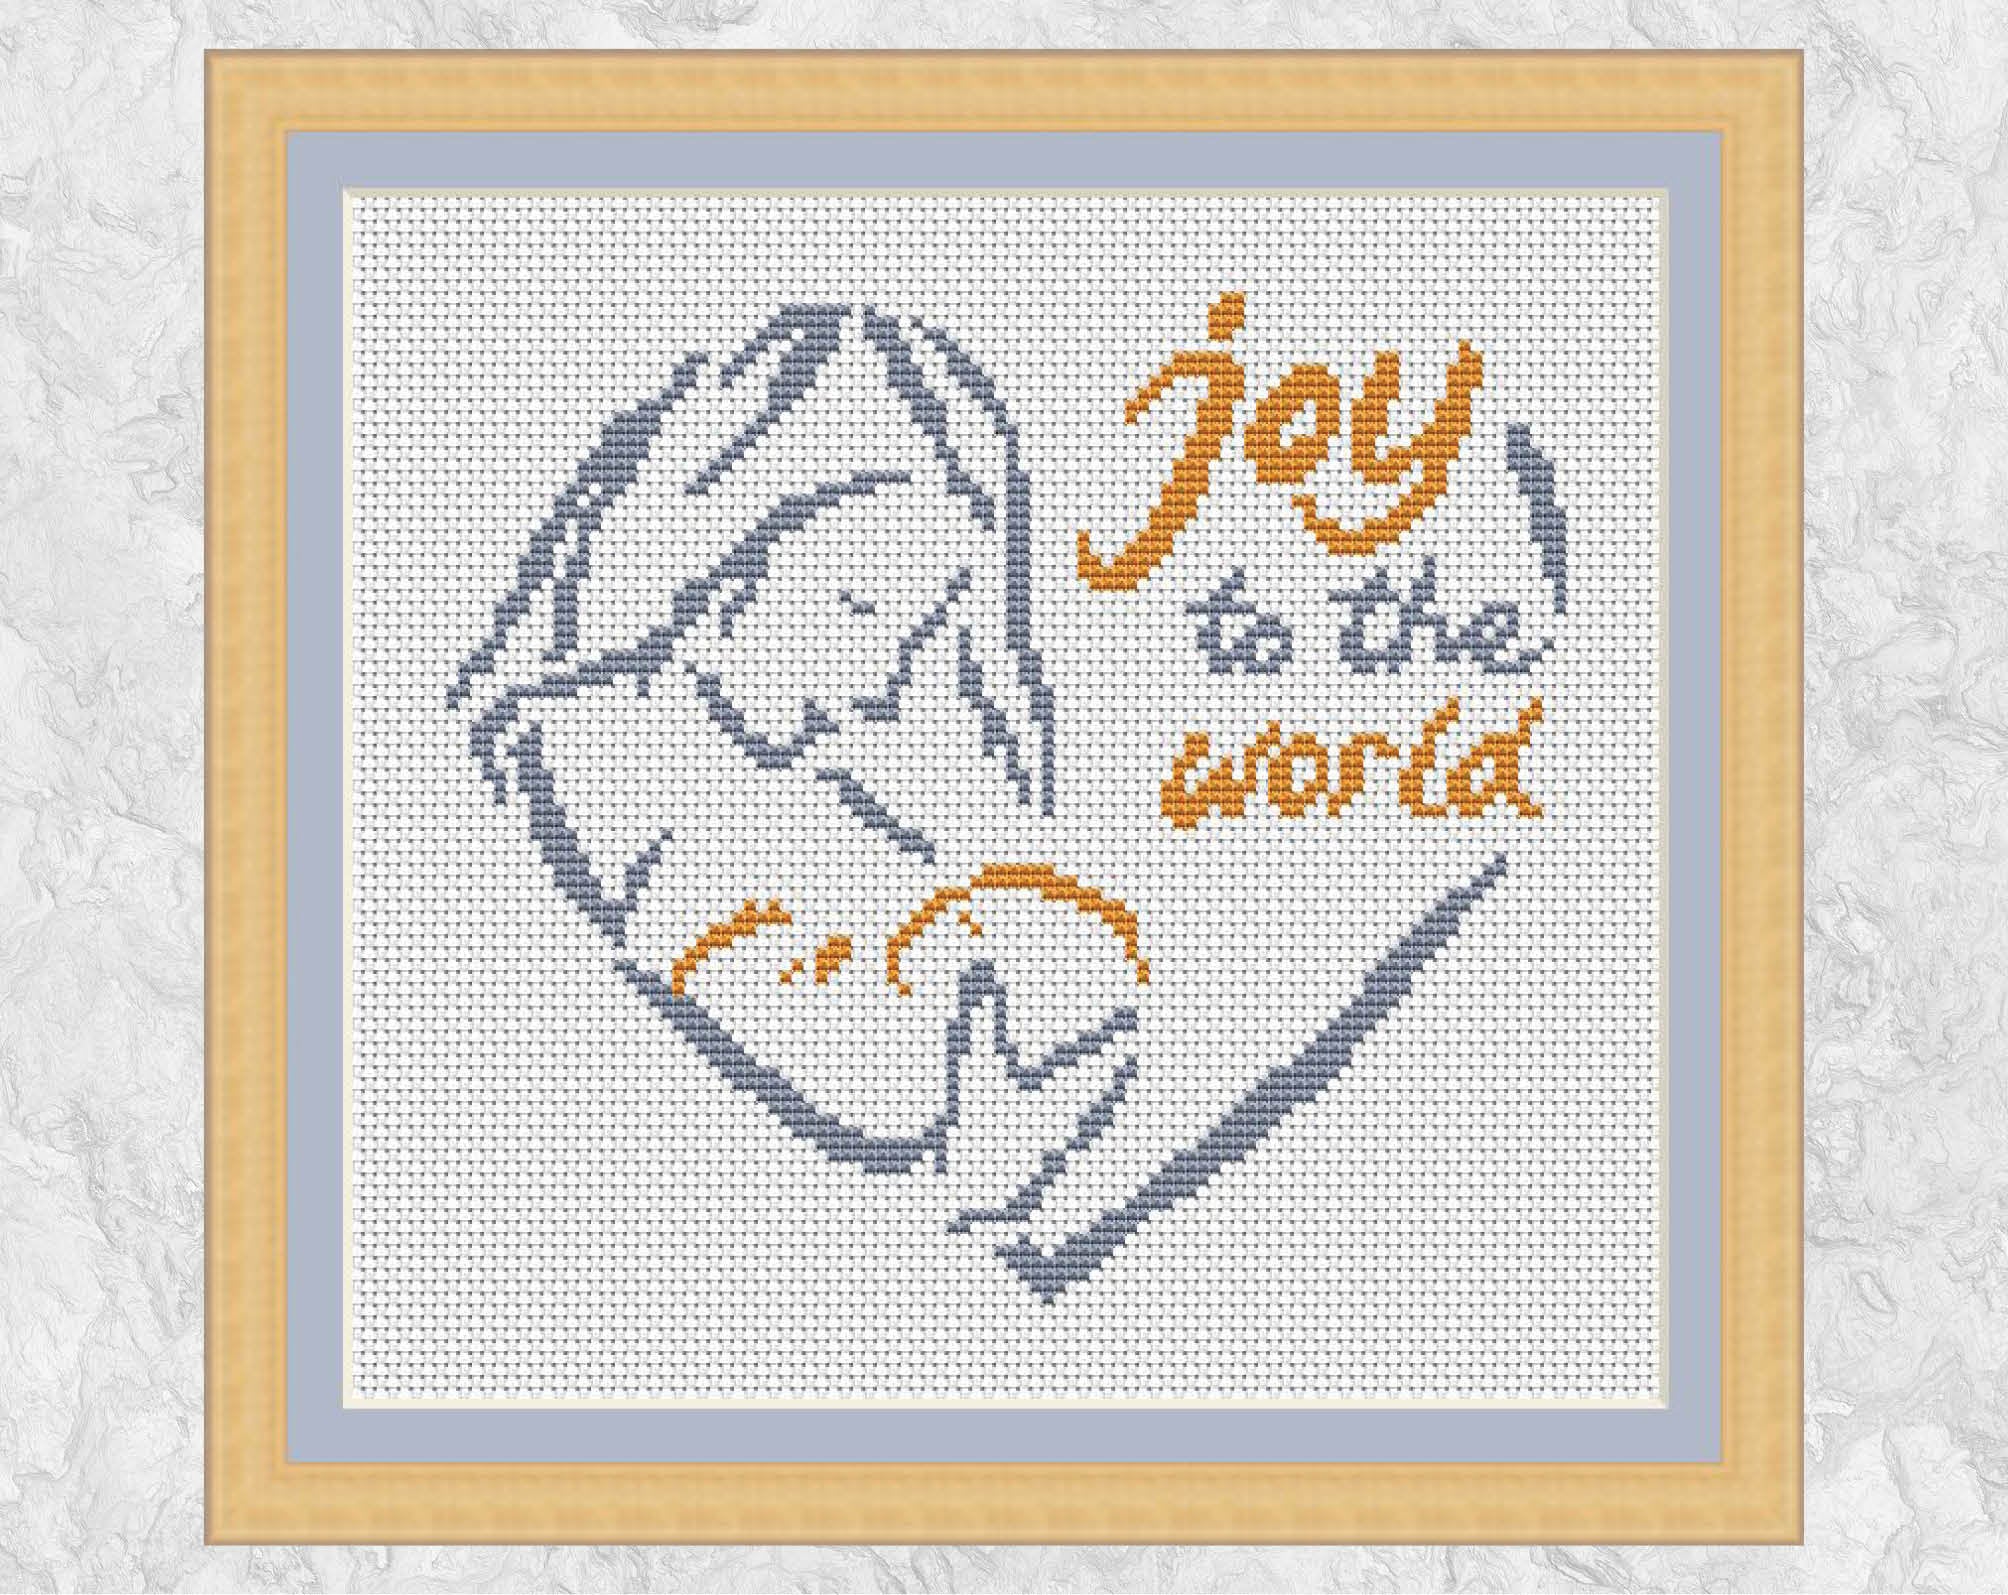 Nativity Heart cross stitch pattern - sketched outline design of Mary holding the baby Jesus, with the words 'Joy to the world'. Shown with frame.